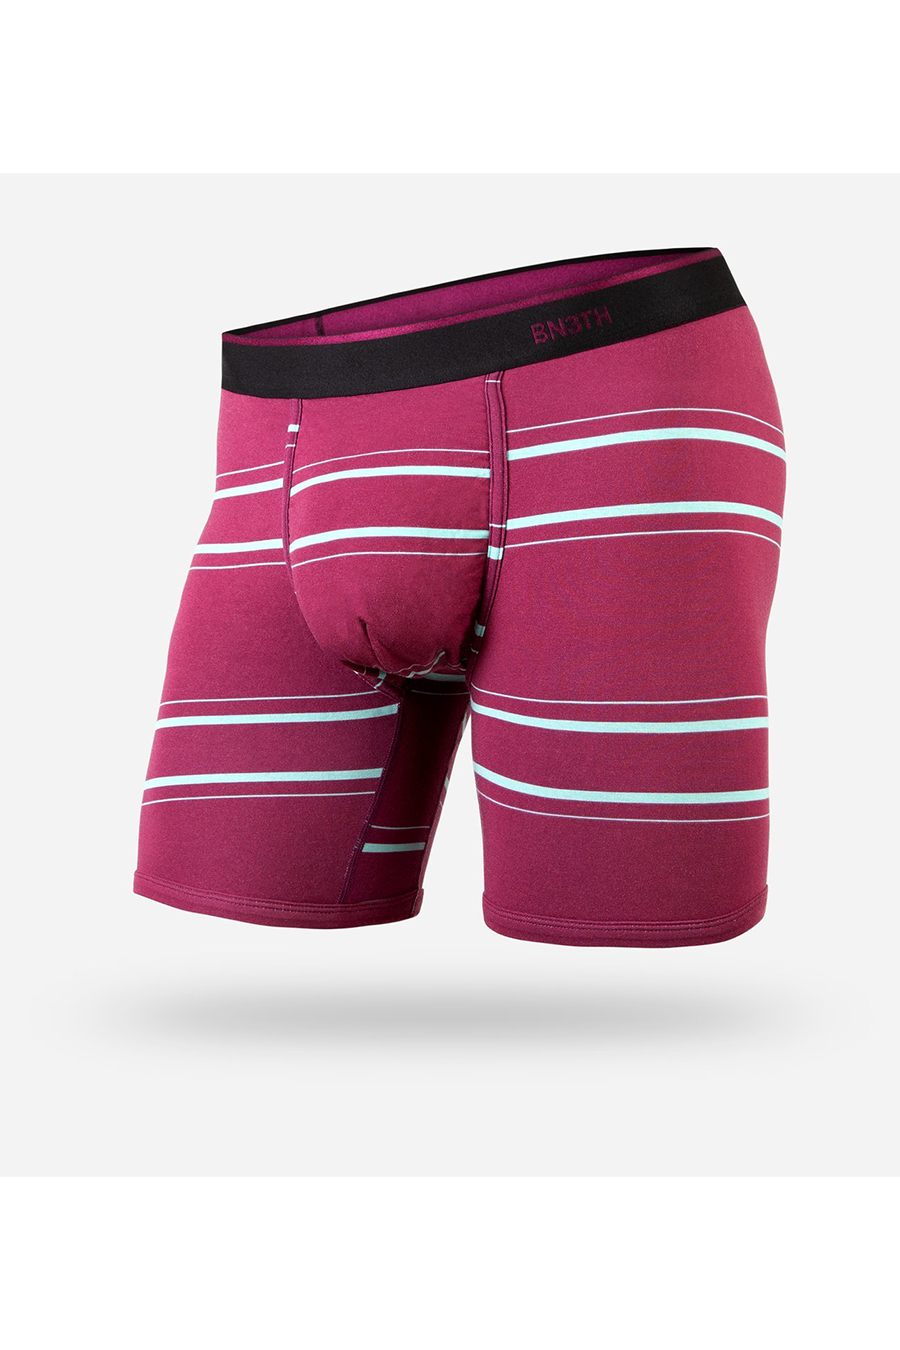 Classic Boxer Brief | Nice Stripe - West of Camden - Main Image Number 3 of 4